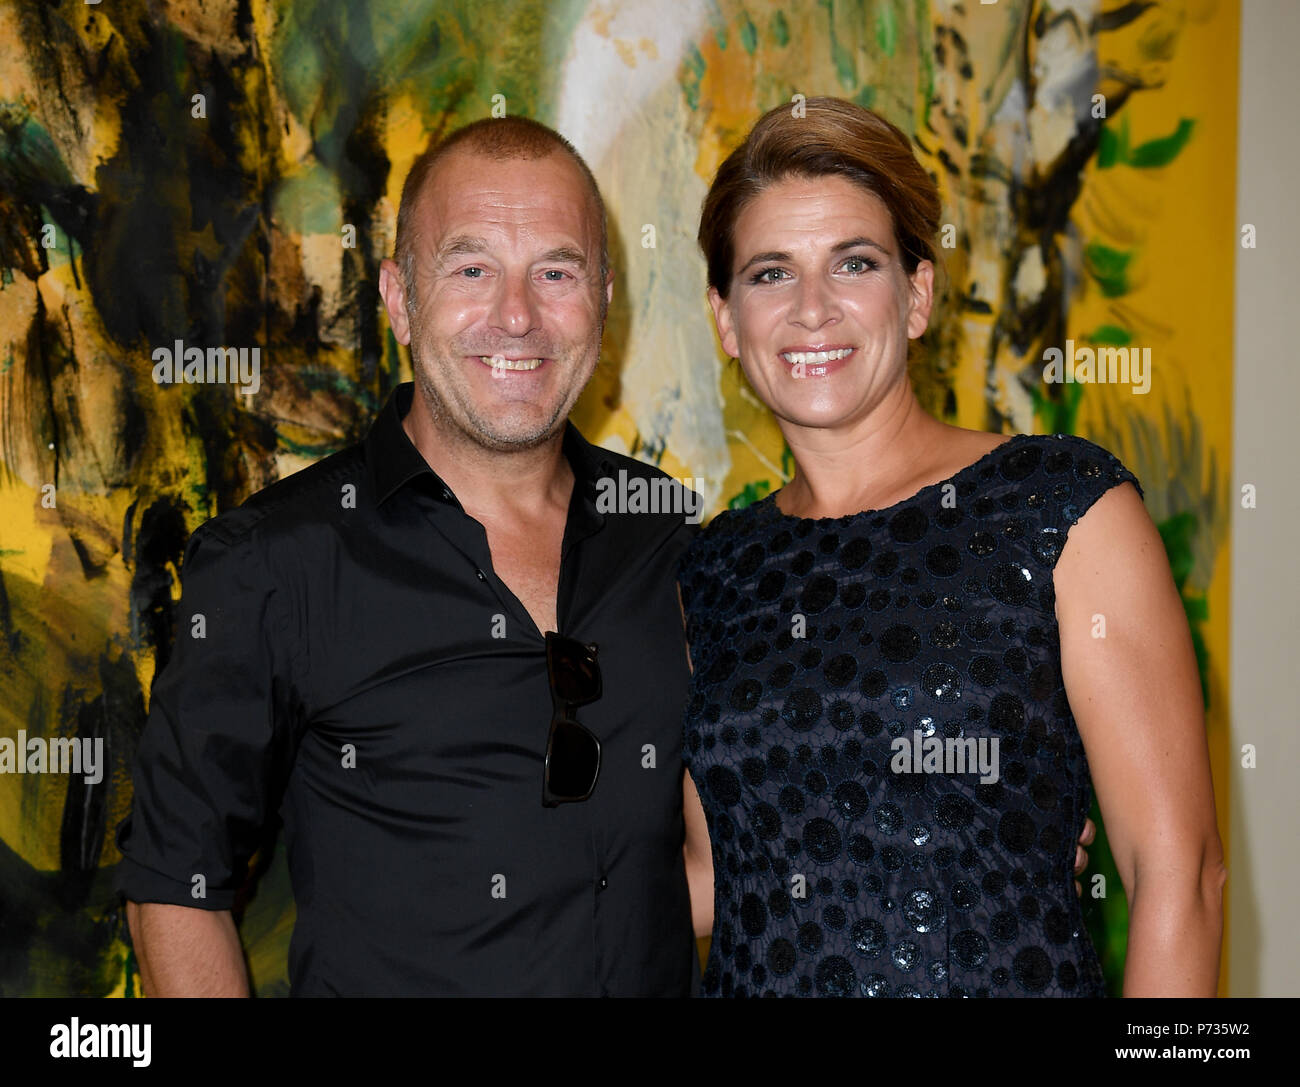 03.07.2018, Berlin: Heino Ferch, actor comes with wife Marie-Jeanette to an installation of the label Laurel. At the Berlin Fashion Week the collections for spring / summer 2019 will be presented. Photo: Britta Pedersen / dpa central image / dpa | usage worldwide Stock Photo